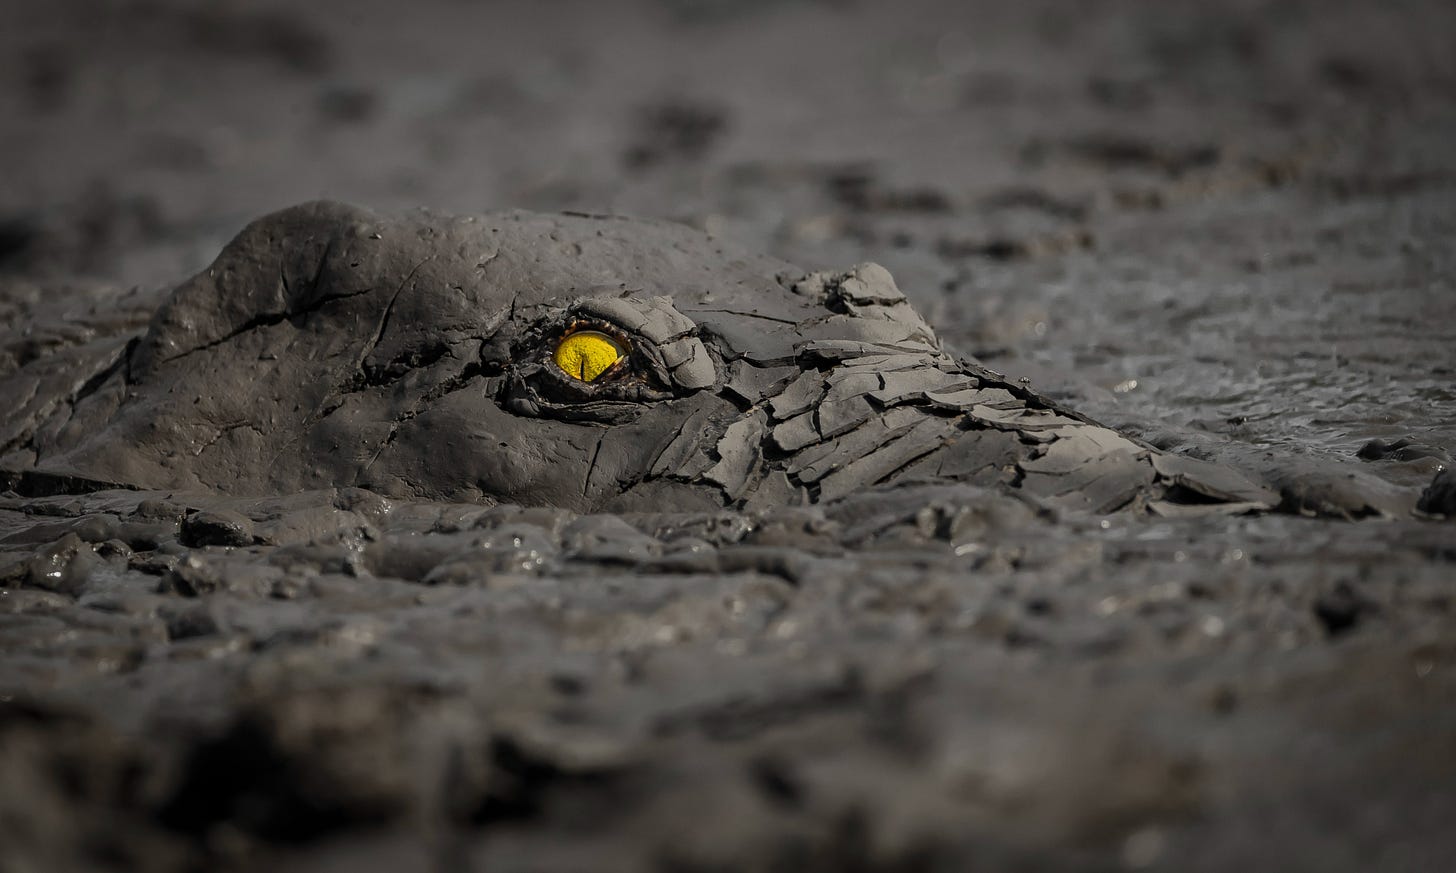 A crocodile's head, covered in drying mud, is just visible in a mud pool.